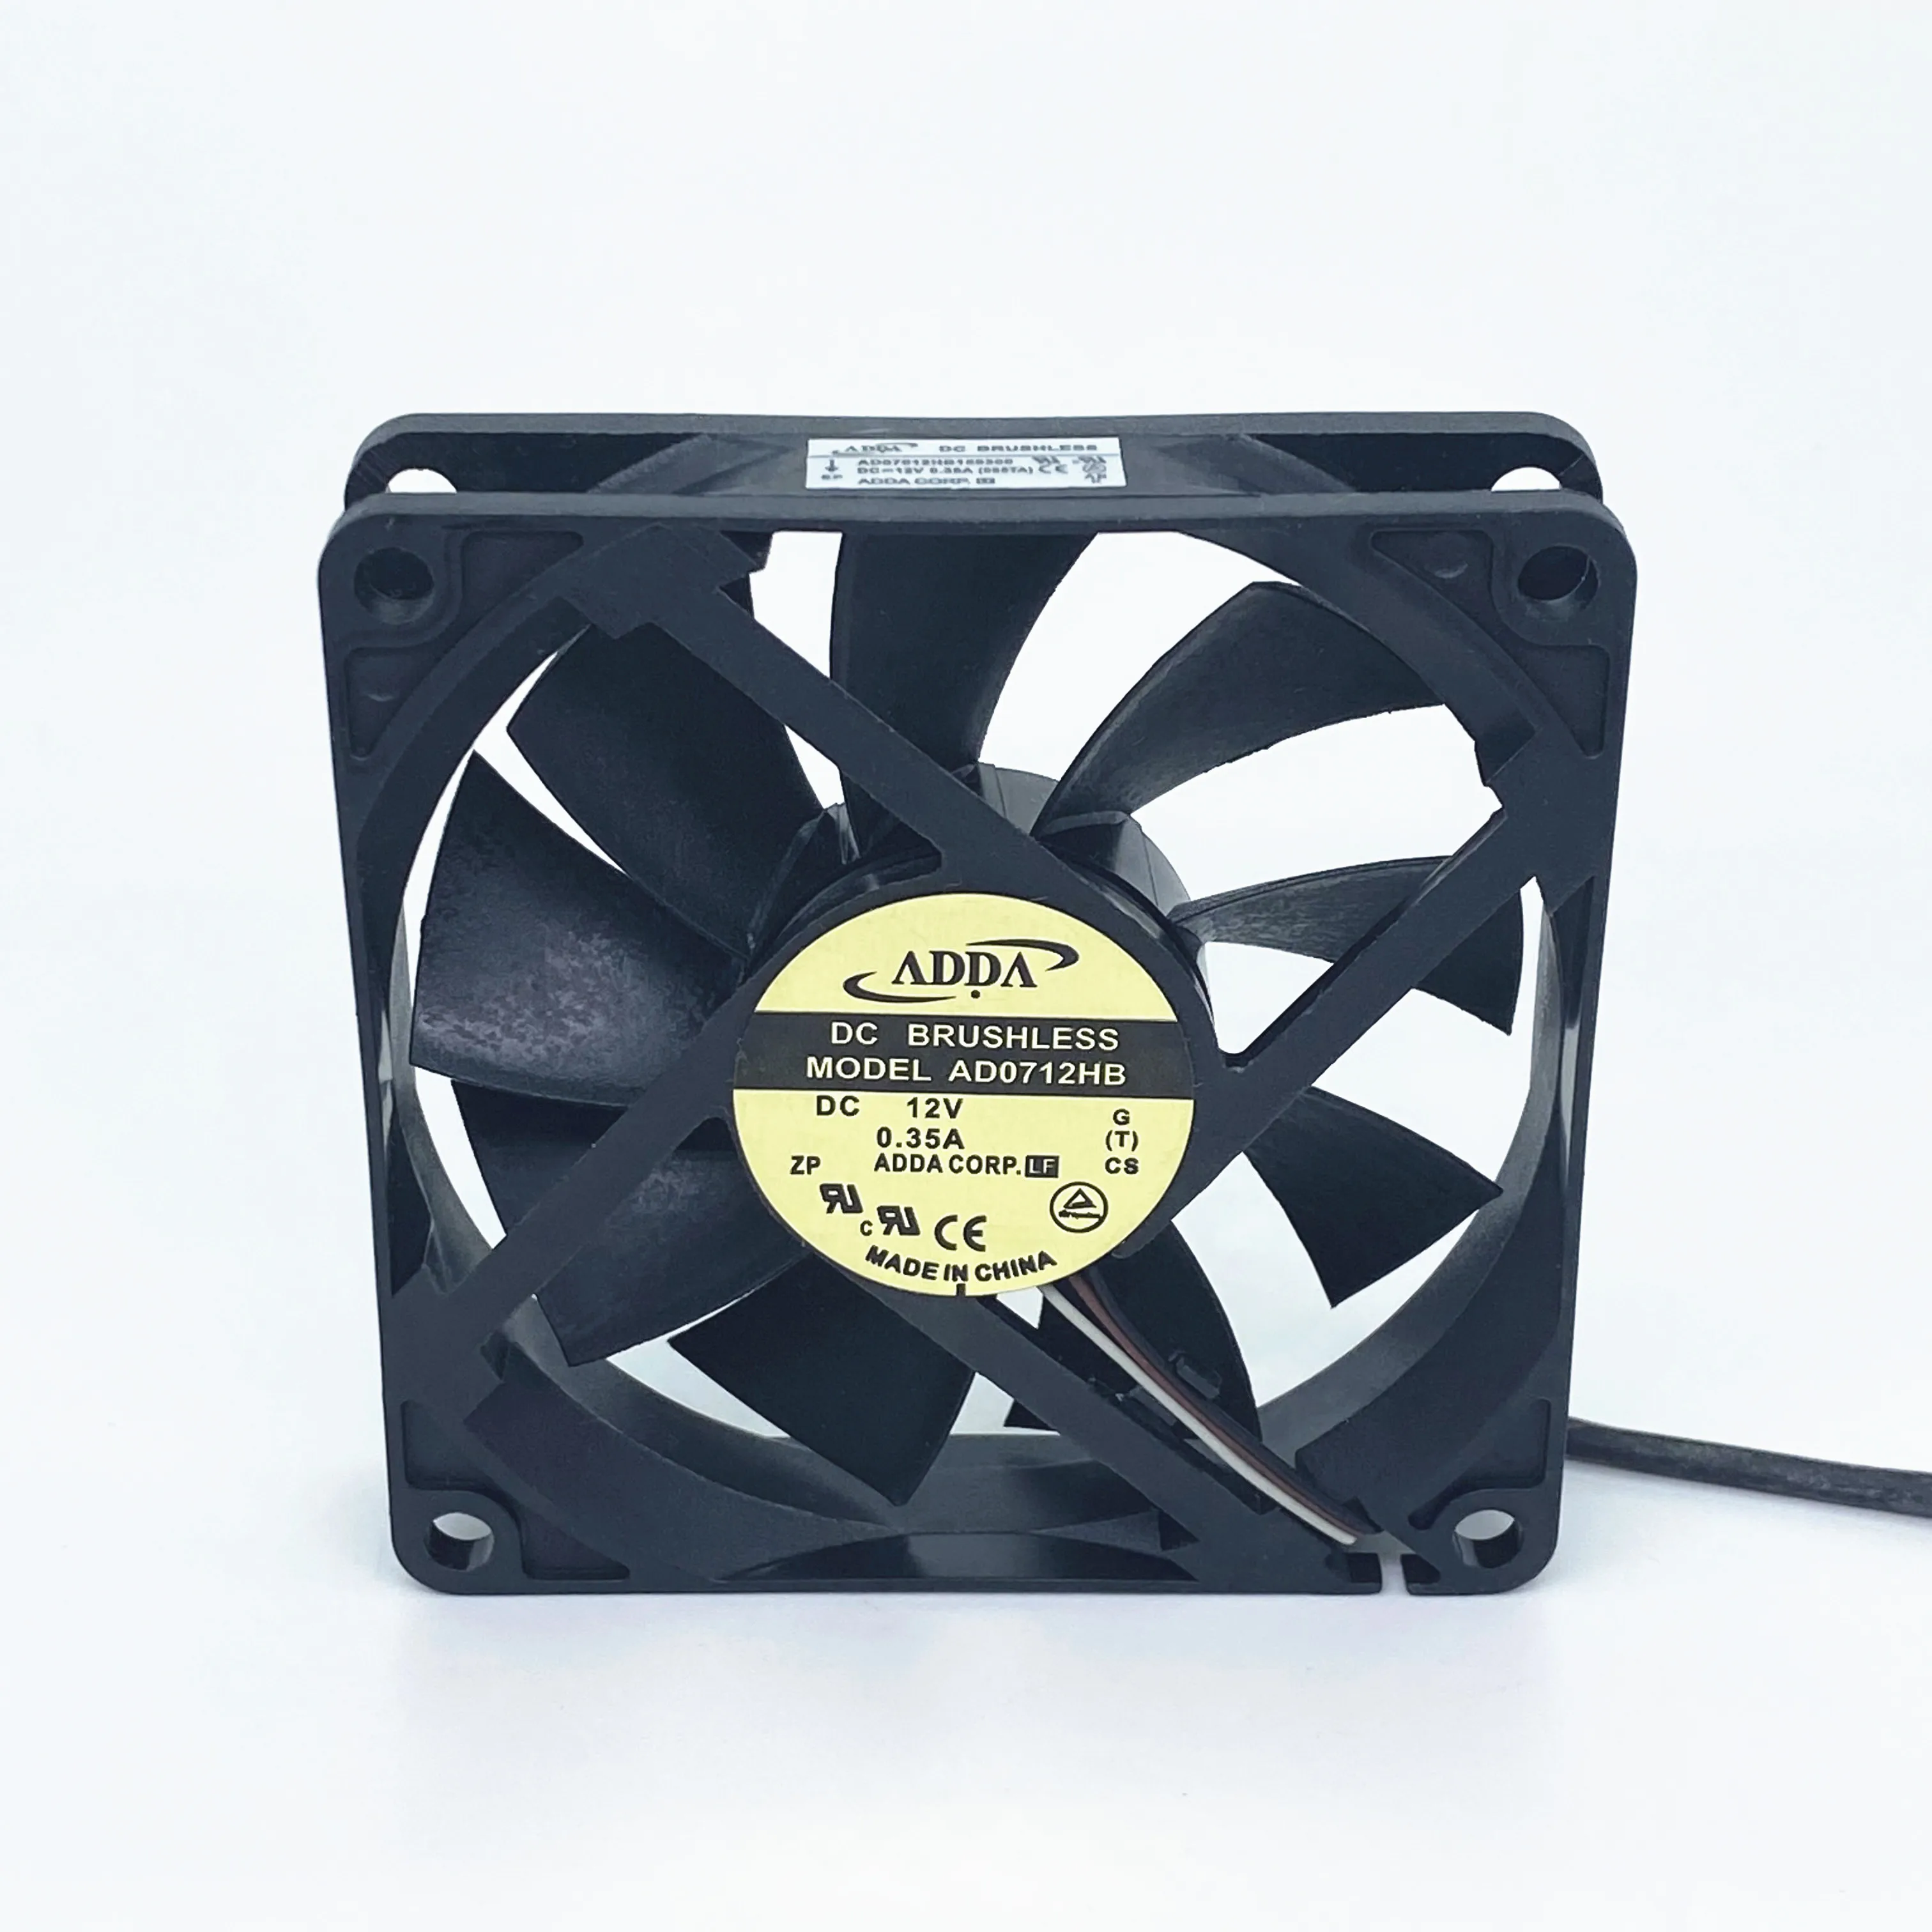 

New ADDA Dual Ball Bearing 7015 70MM 70x70x15mm Case Cooling Fan 12V 0.35A with 3pin